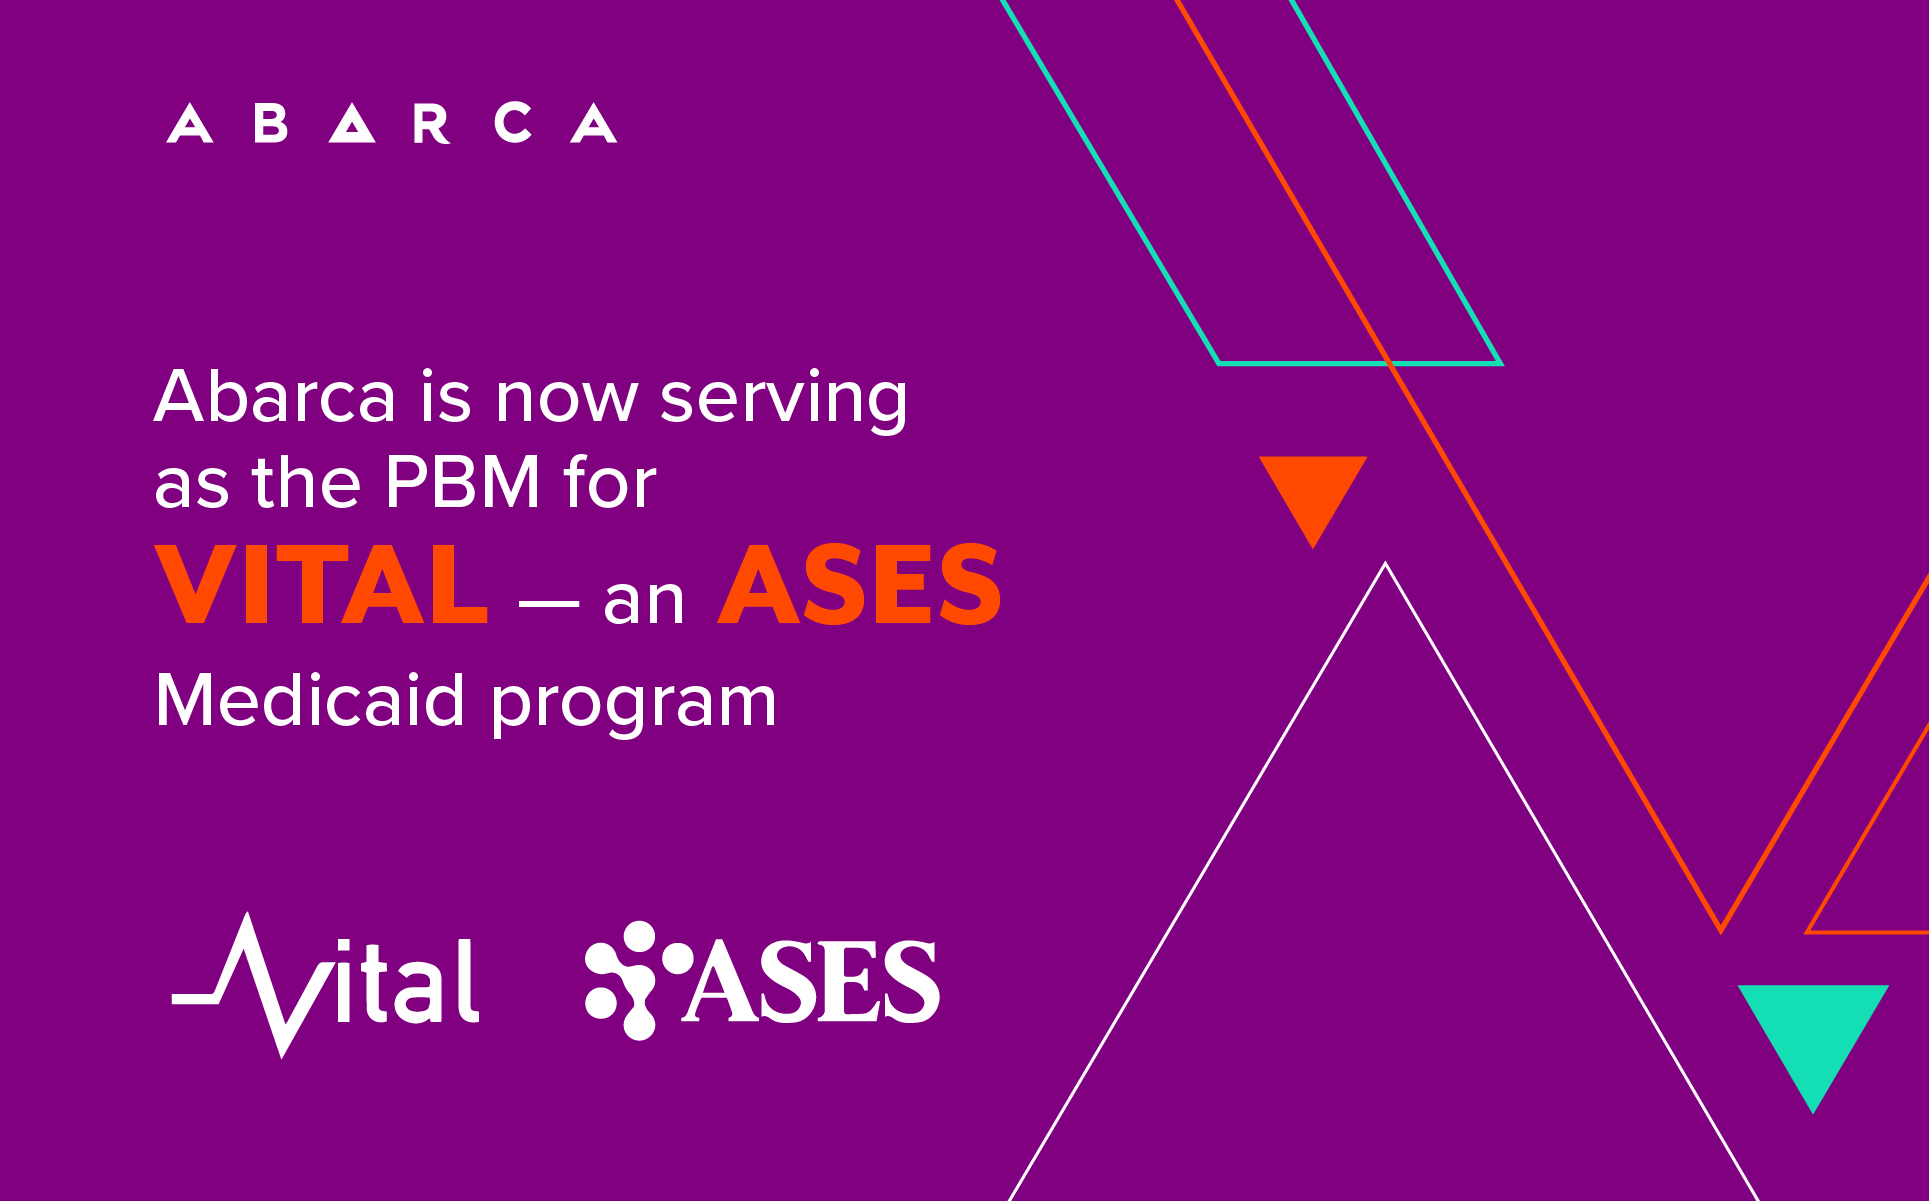 Abarca selected as PBM for Vital — an ASES Medicaid program in Puerto Rico